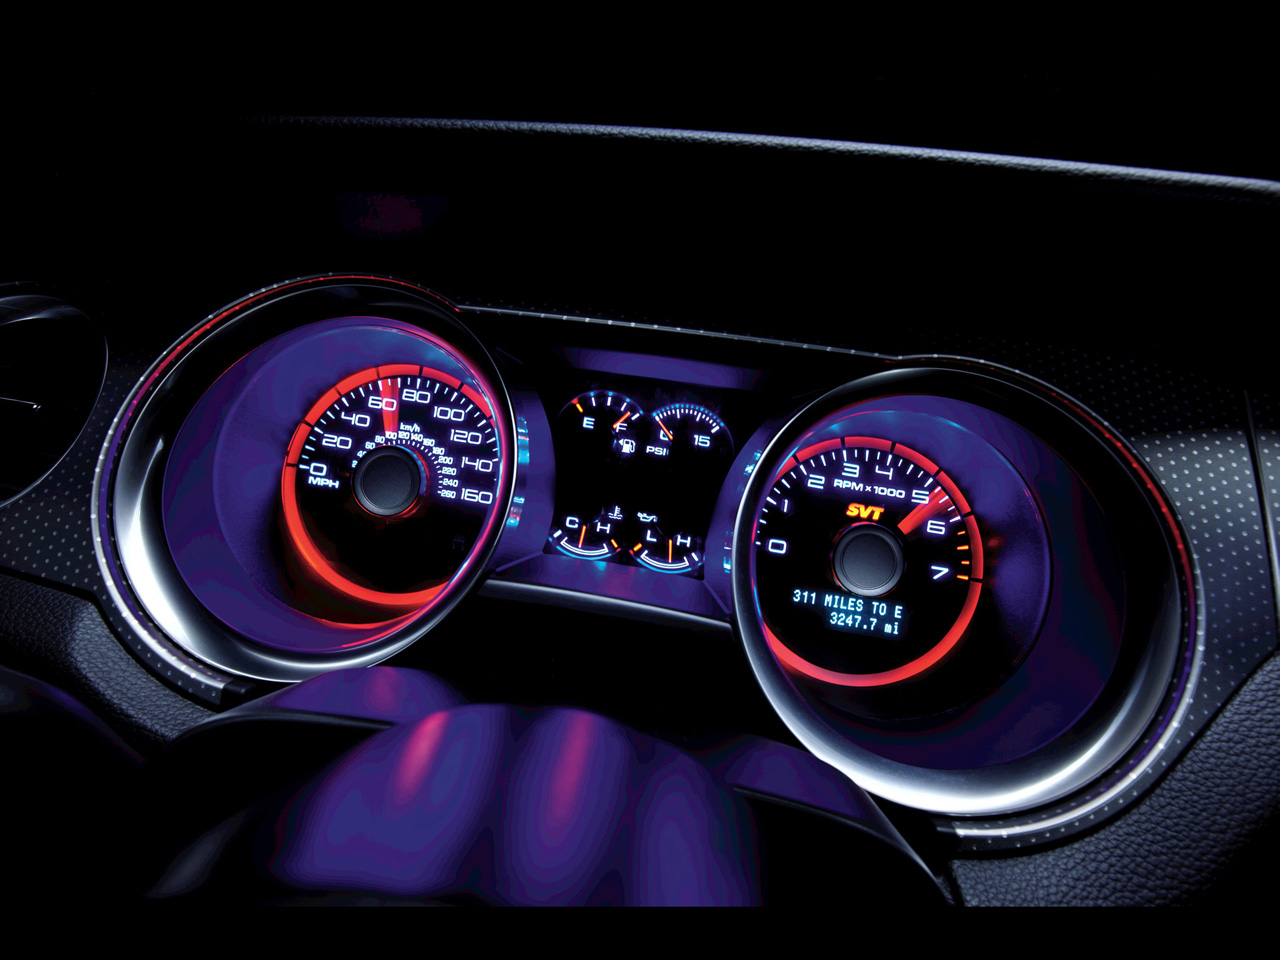  2012 Ford Shelby GT500  2012-Ford-Shelby-GT500-Gauges-1280x960